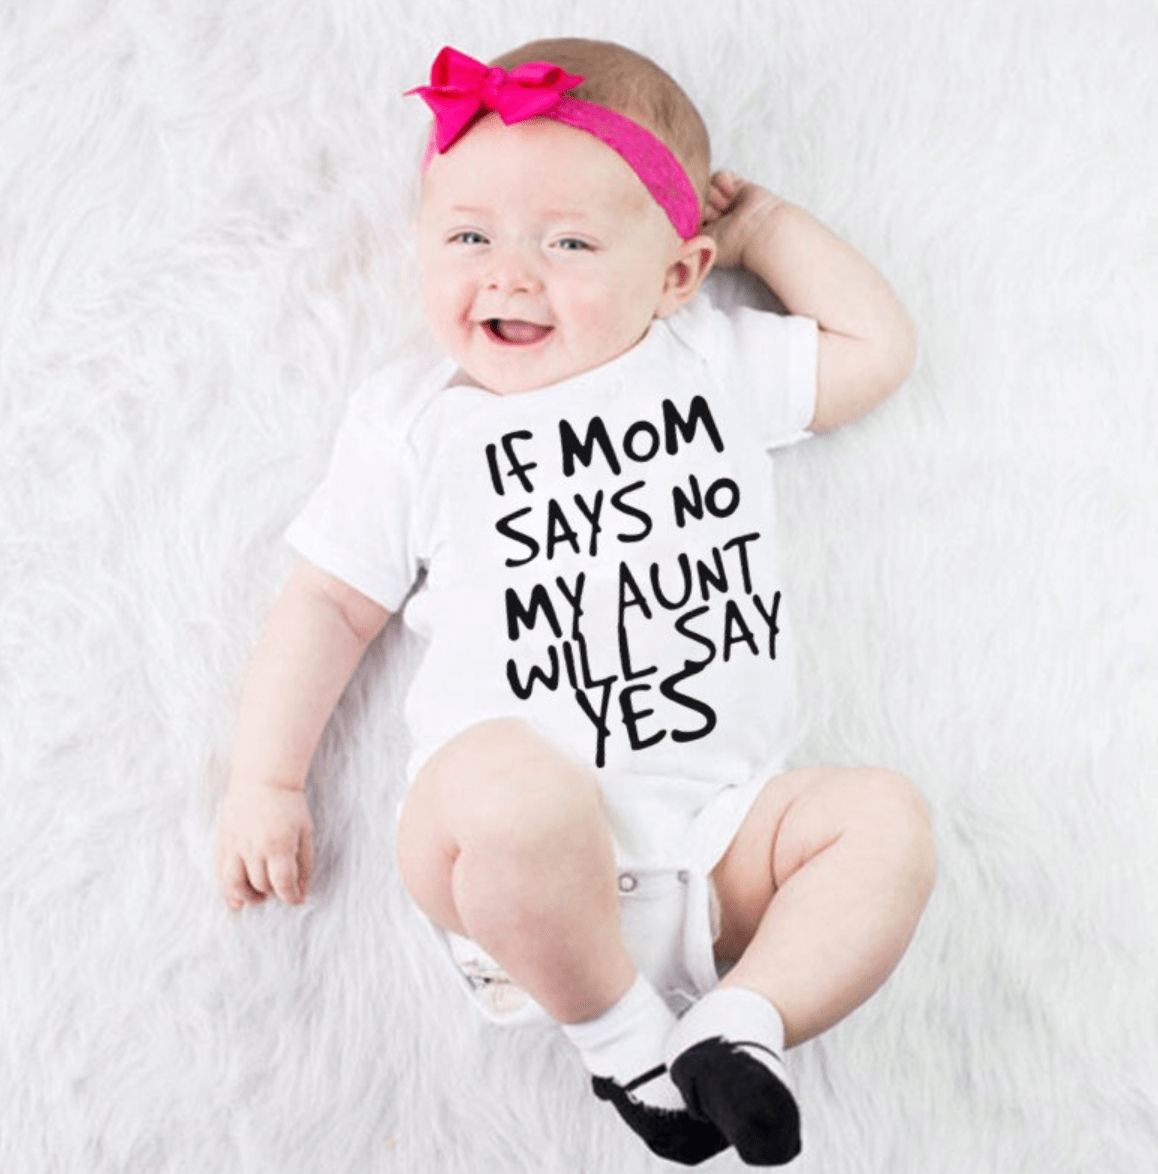 IF MOM SAYS NO MY AUNT WILL SAY YES Cotton Infant Baby Romper is as comfortable as it is cute.  Made with 100% cotton, it is soft, breathable, sweat-absorbent, and easy to wash.